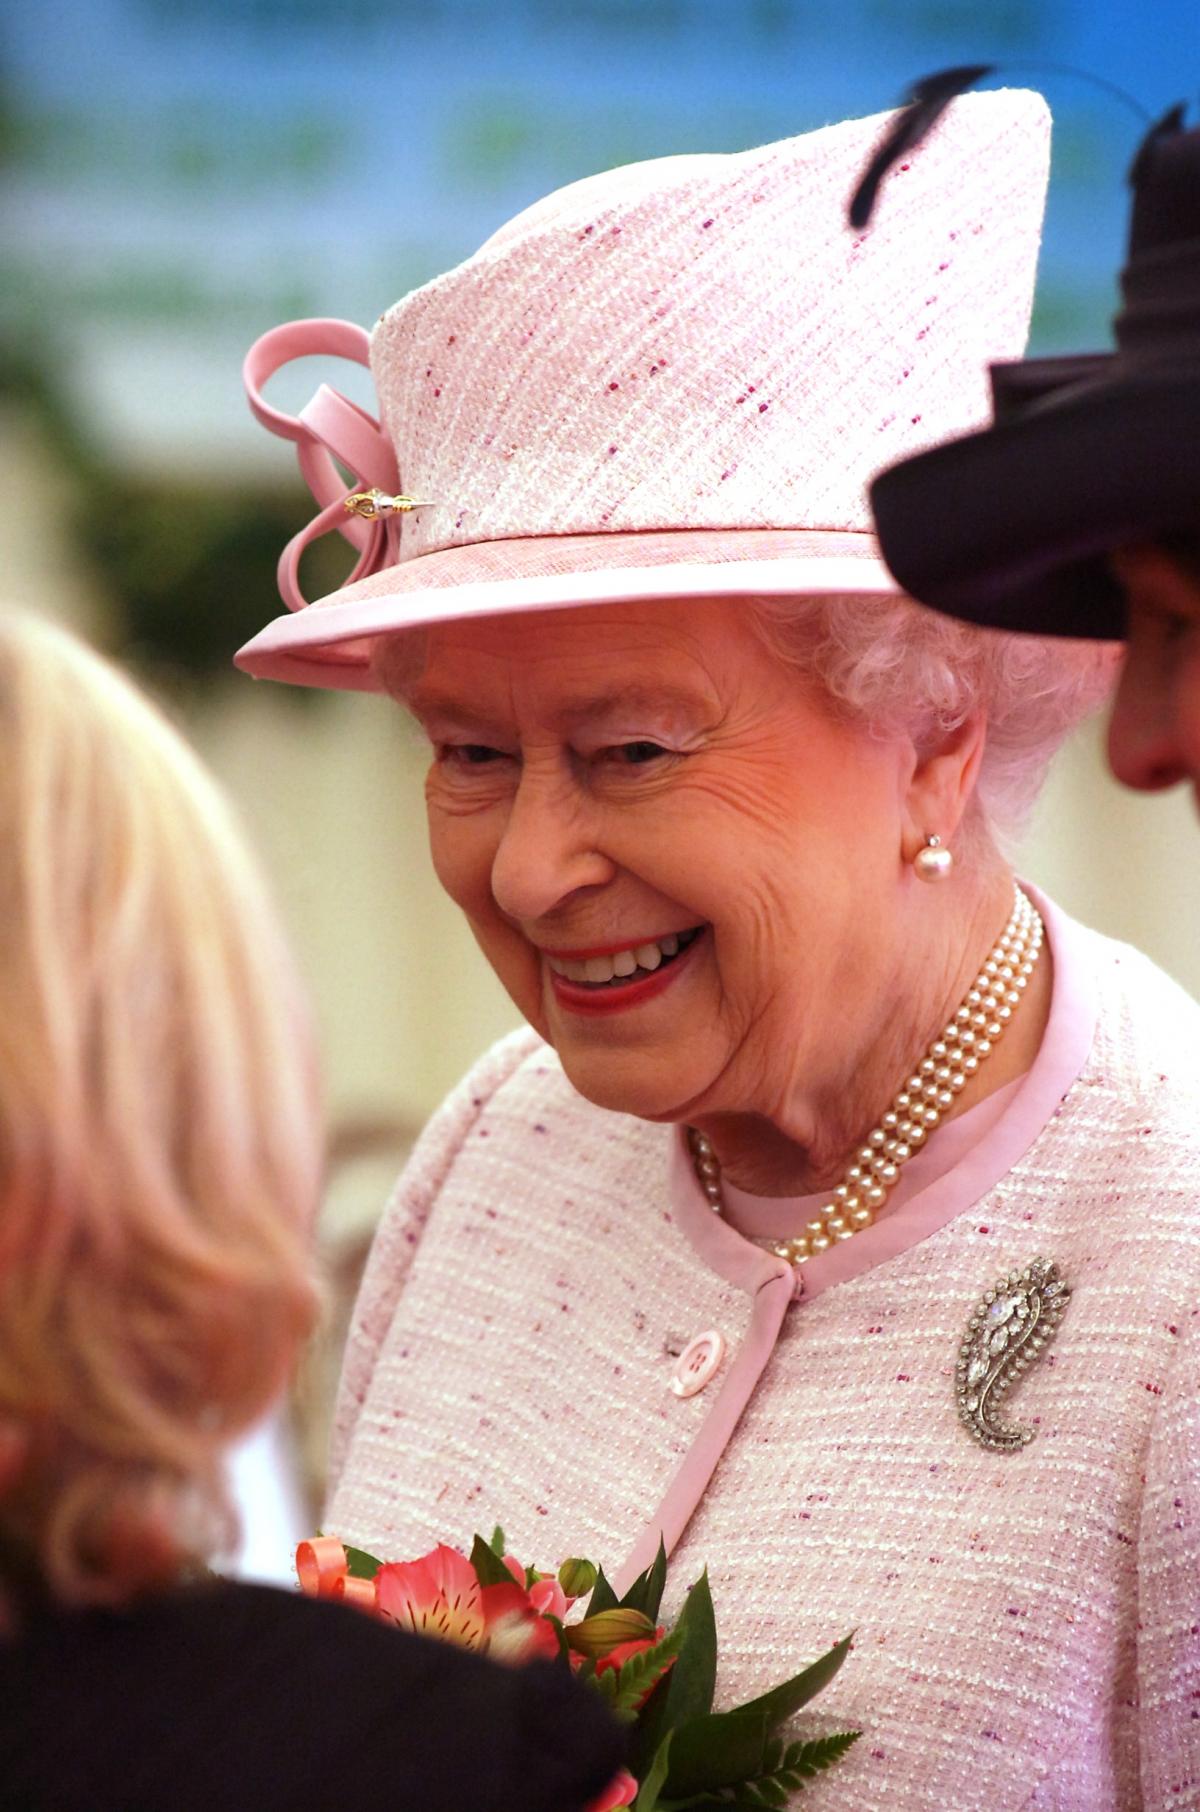 The Queen during her 2012 Diamond Jubiliee visit to Hereford, meeting guests at the George V Playing Fields